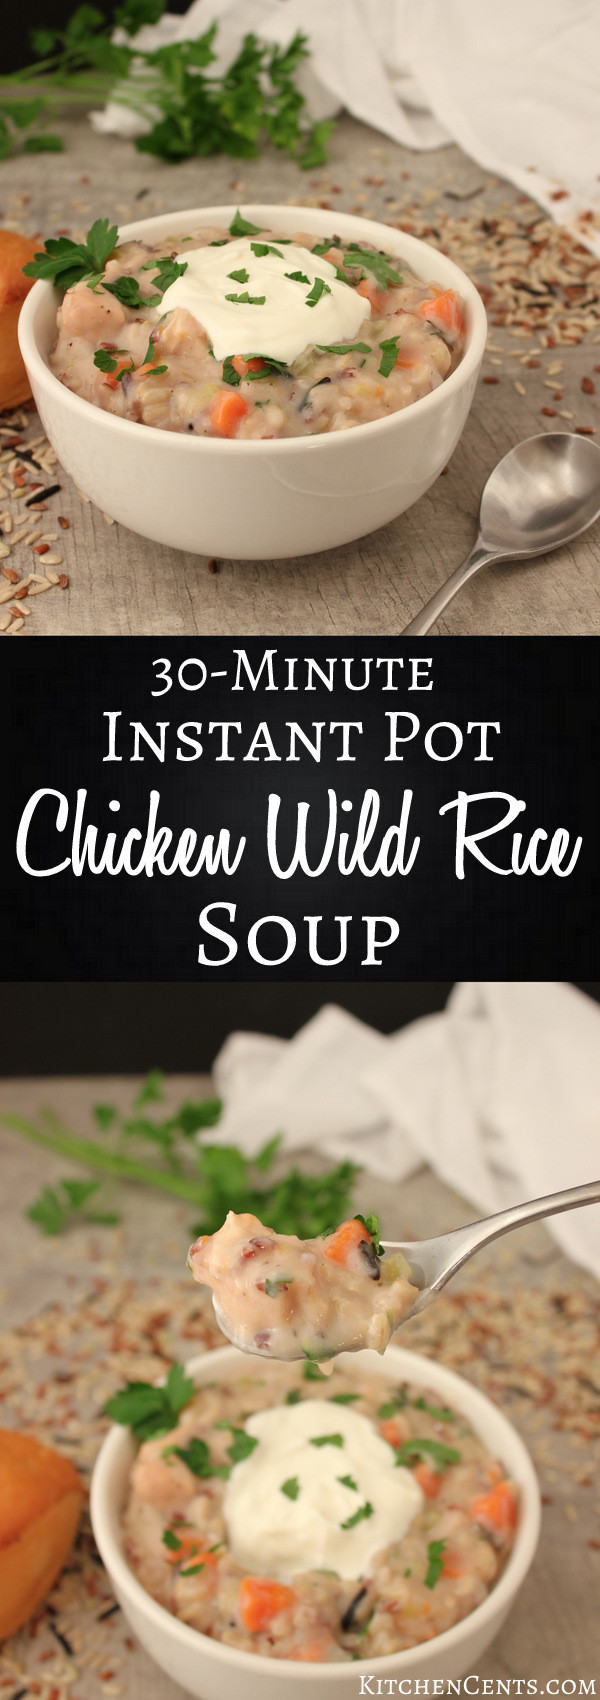 Chicken And Wild Rice Soup Instant Pot
 Quick & Easy Chicken Wild Rice Soup with Instant Pot